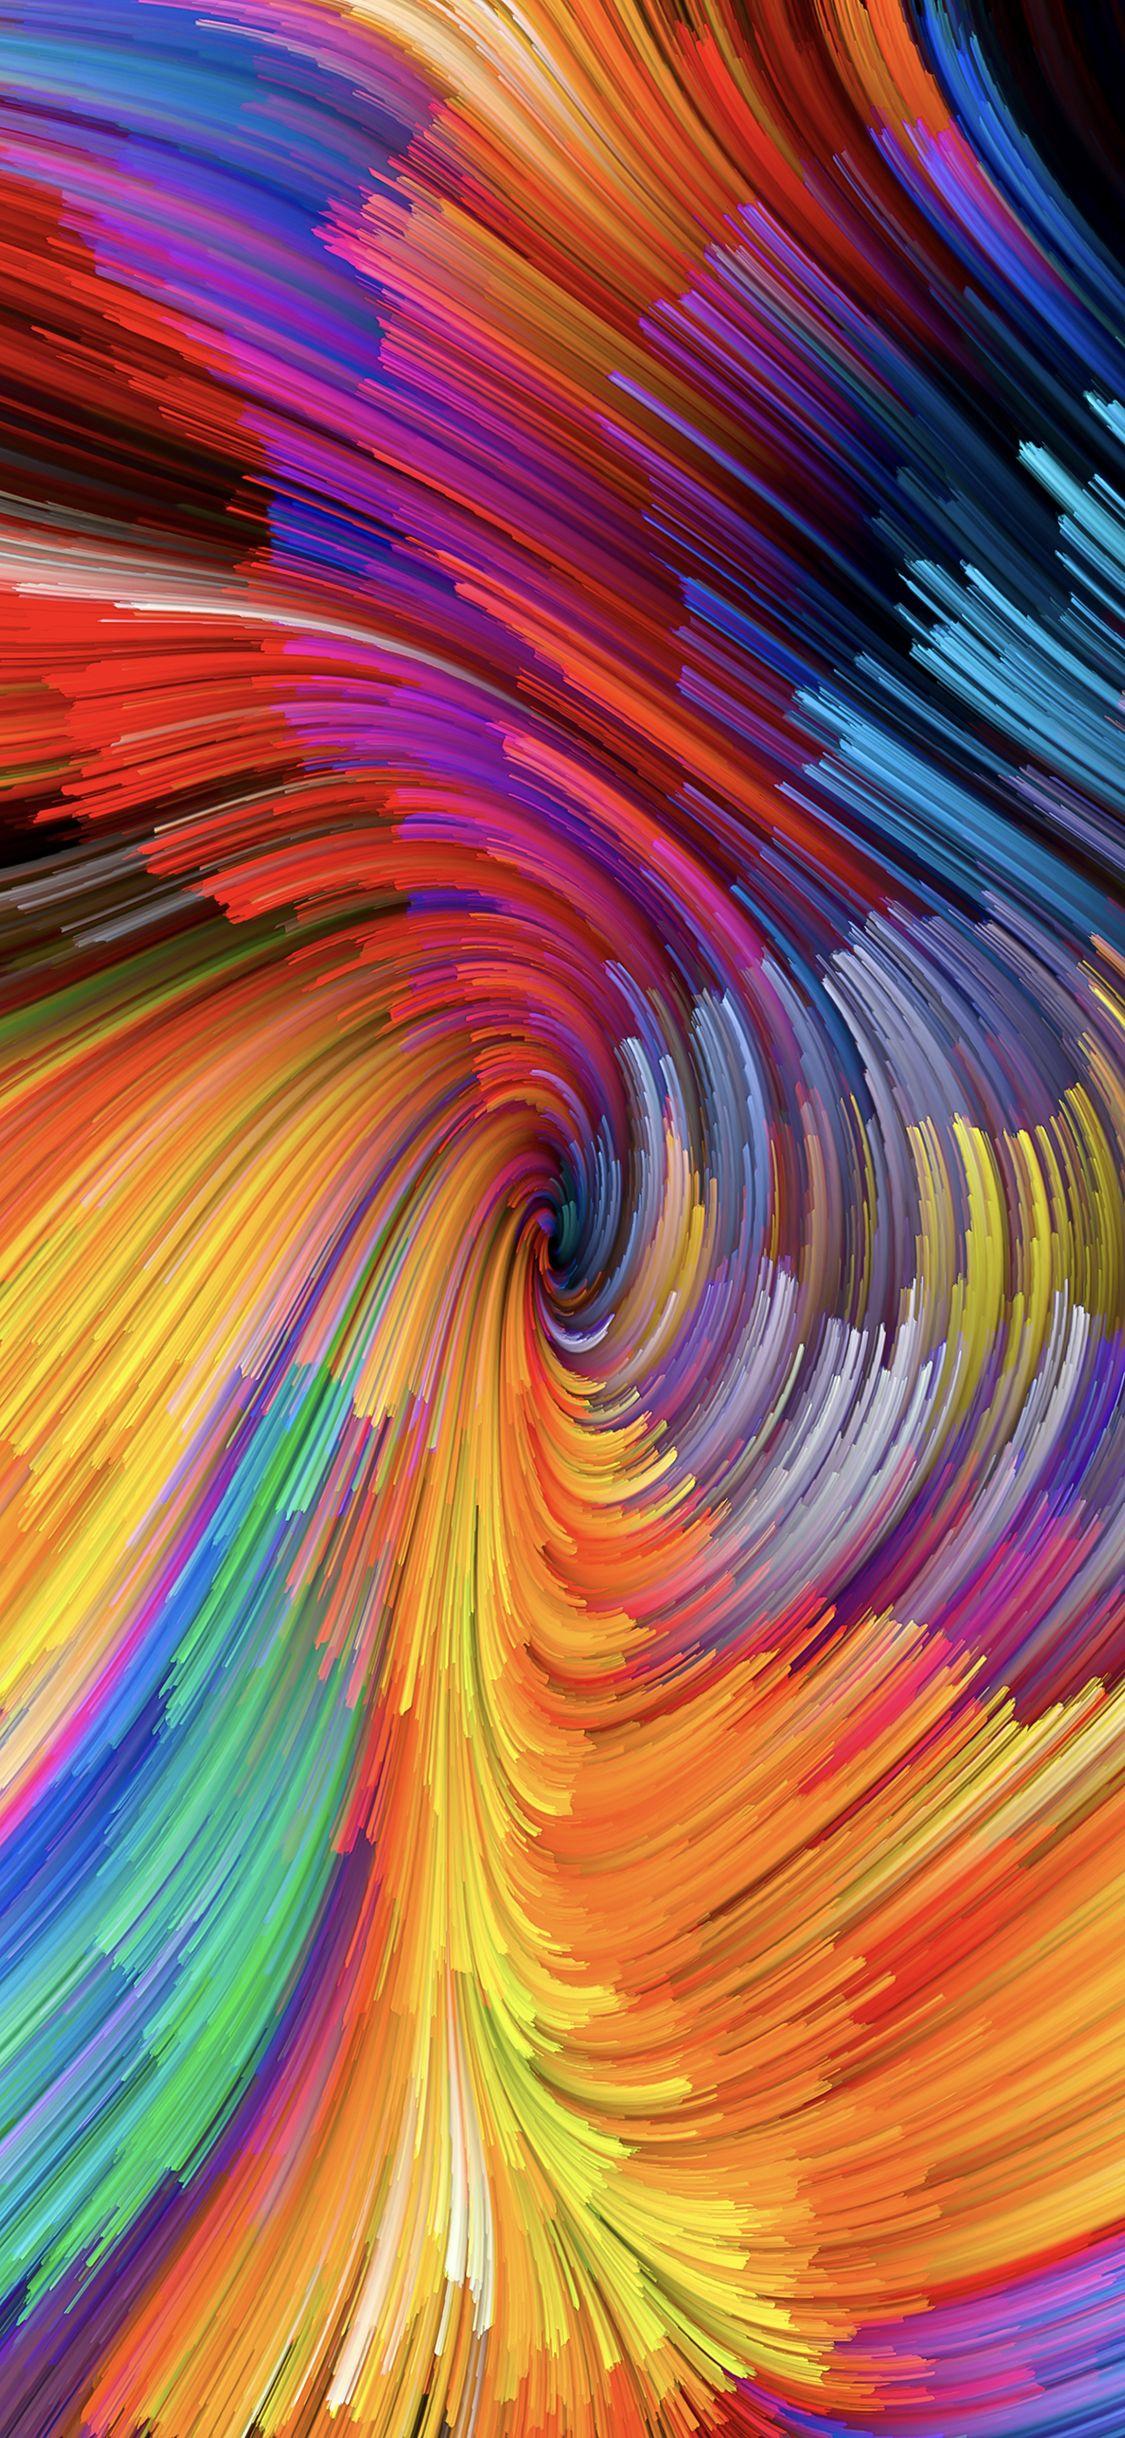 A swirl of fibers from macOS Mojave